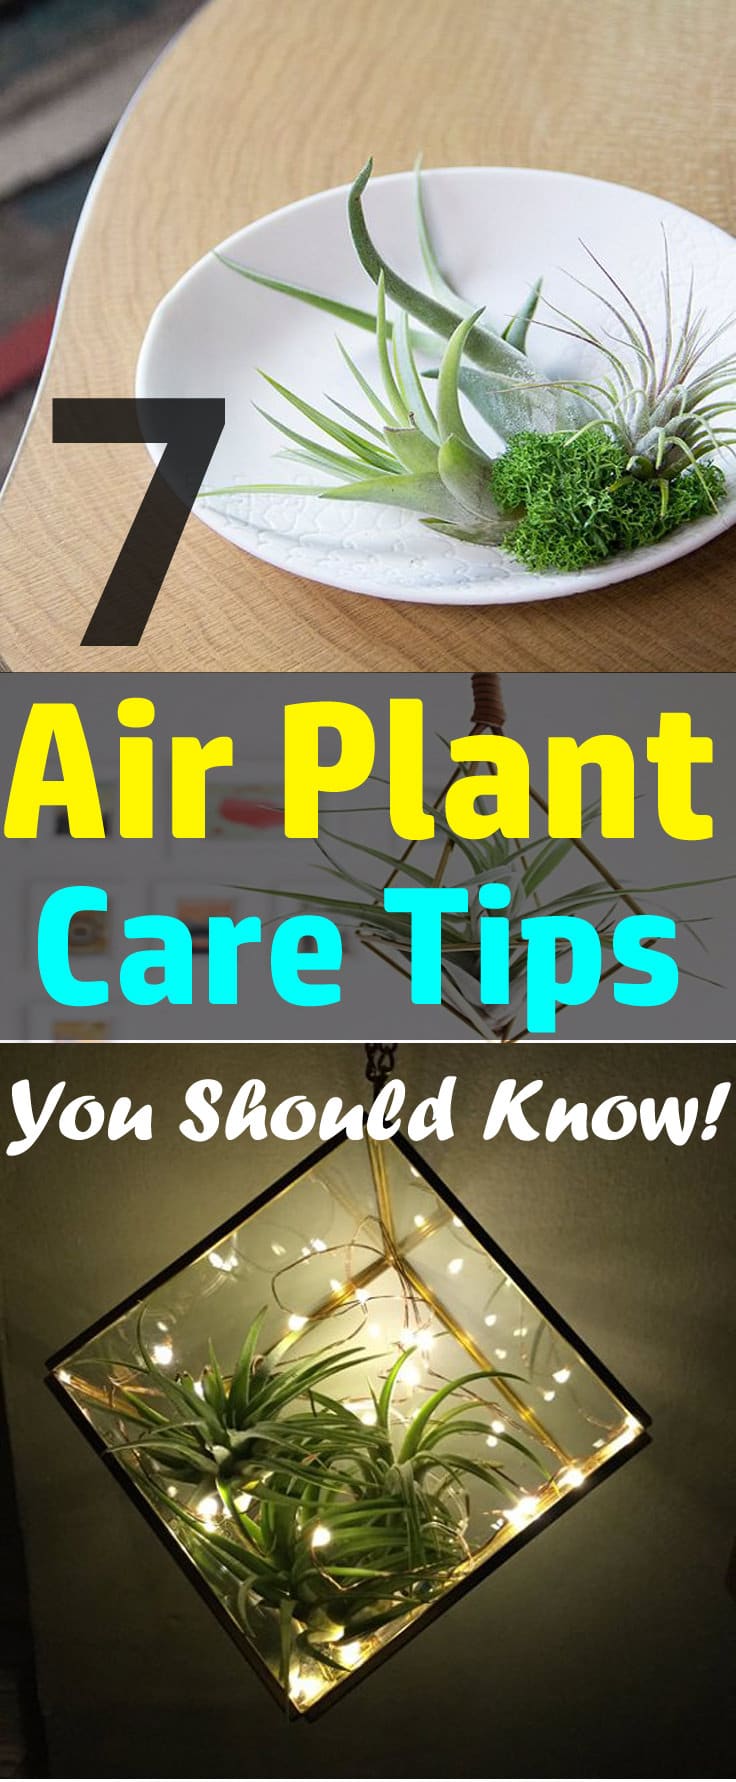 7 Air Plant Care Tips You Should Know! | Balcony Garden Web